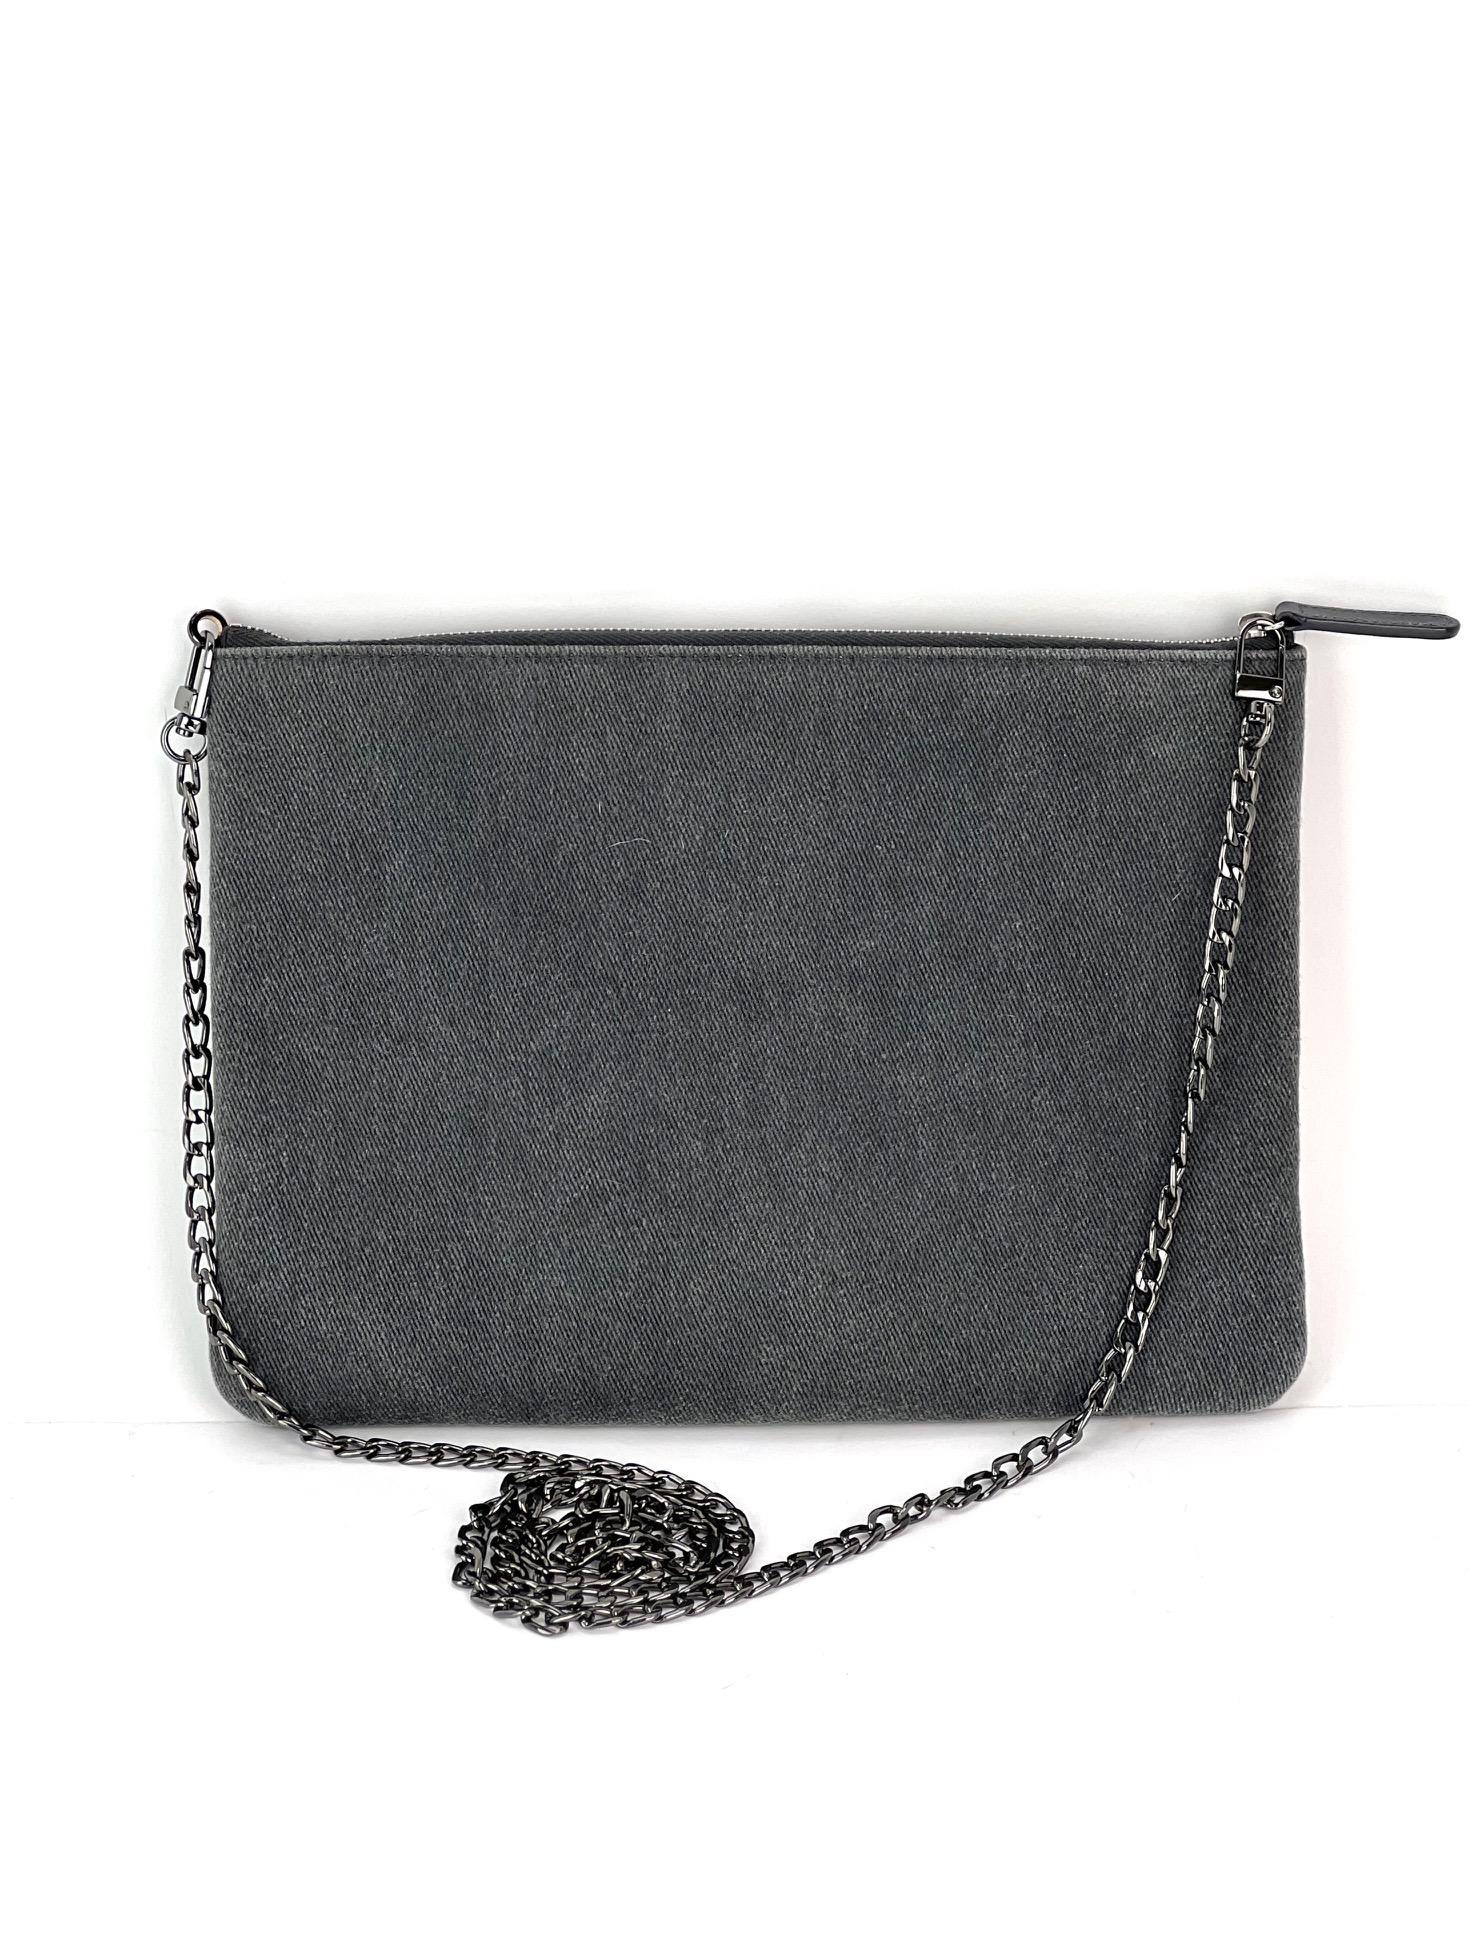 Pre-Owned  100% Authentic
Chanel Deauville Denim Sequin Clutch Shoulder Bag
RATING: A/B...Very Good, well maintained, 
shows minor signs of wear
MATERIAL: denim, sequins, leather
STRAP: NON Chanel black Chain 47'' long
Add to attached non chanel